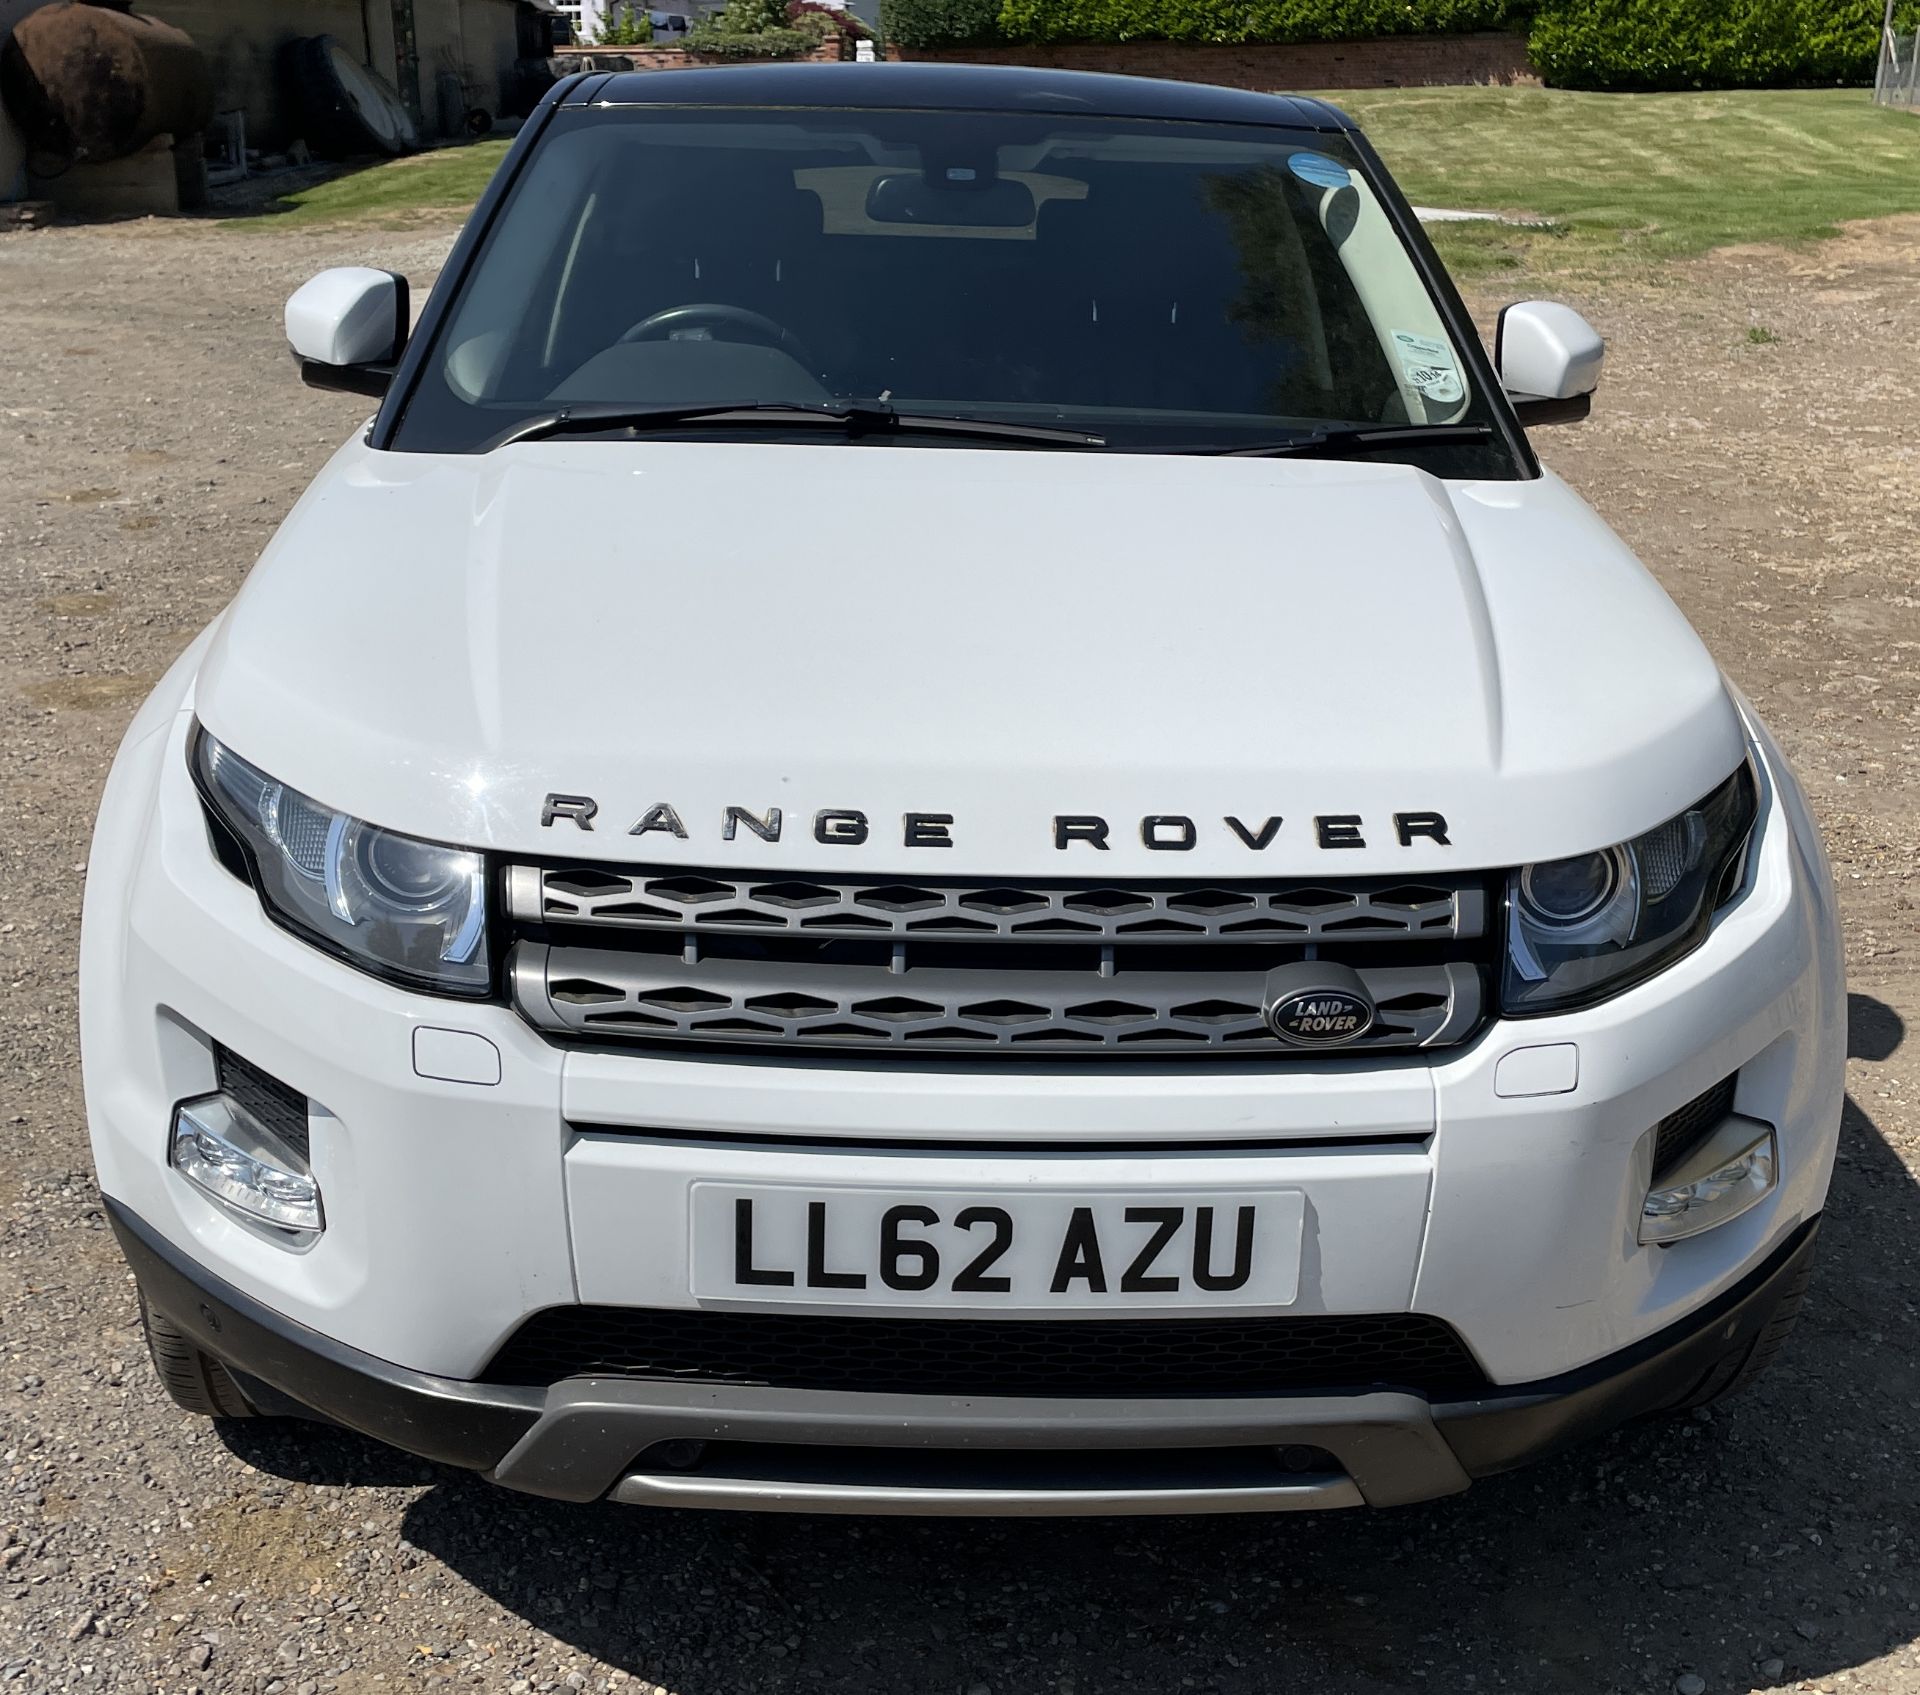 Land Rover Range Rover Evoque, Hatchback, 2.2 Sd4 Pure 5dr Auto [Tech Pack], Registration LL62 - Image 8 of 26